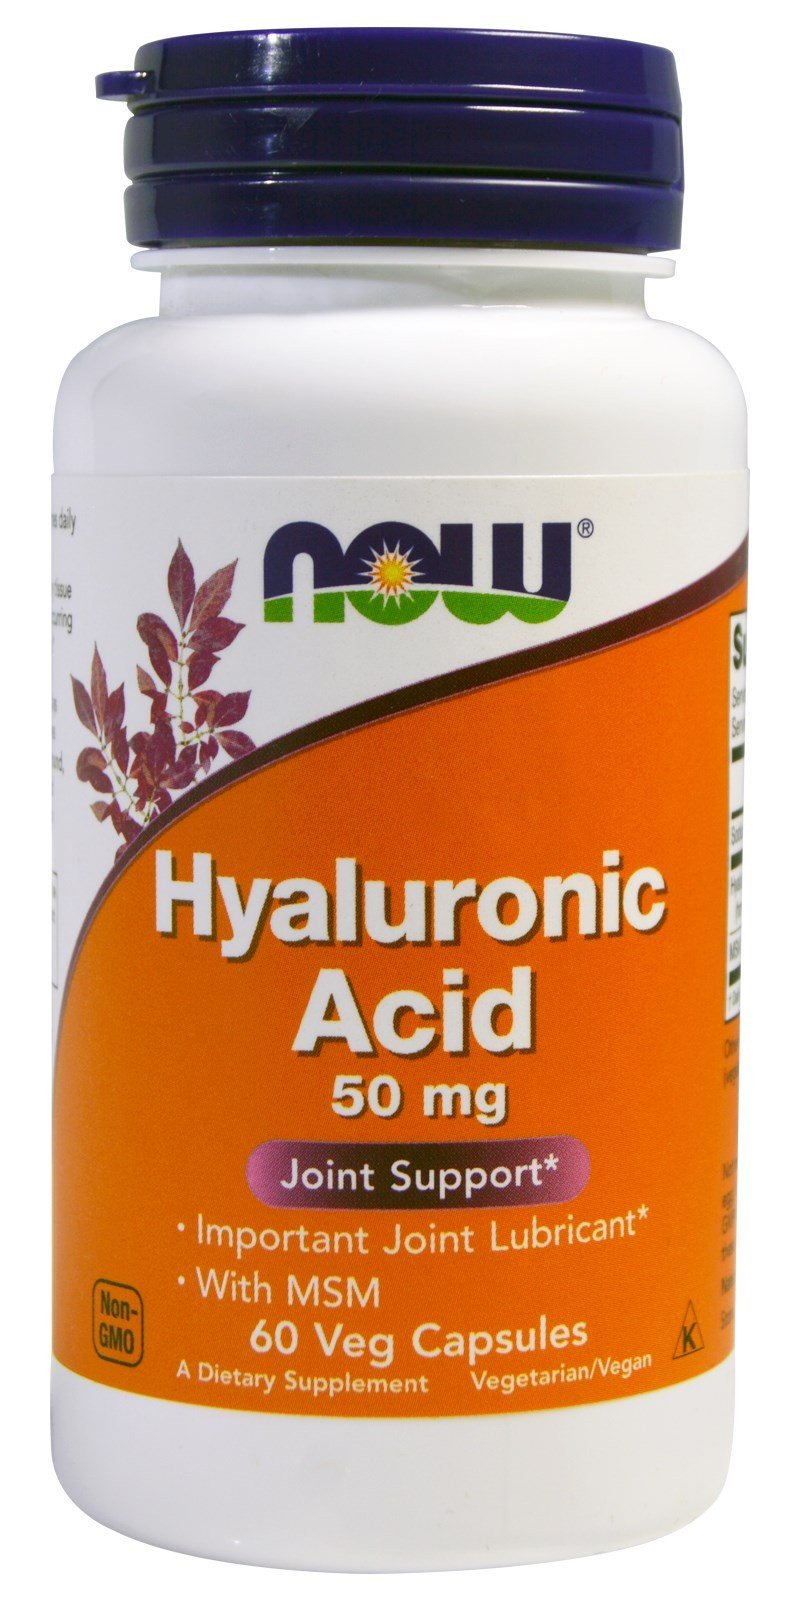 Hyaluronic Acid with MSM, 60 pcs, Now. Hyaluronic Acid. General Health 